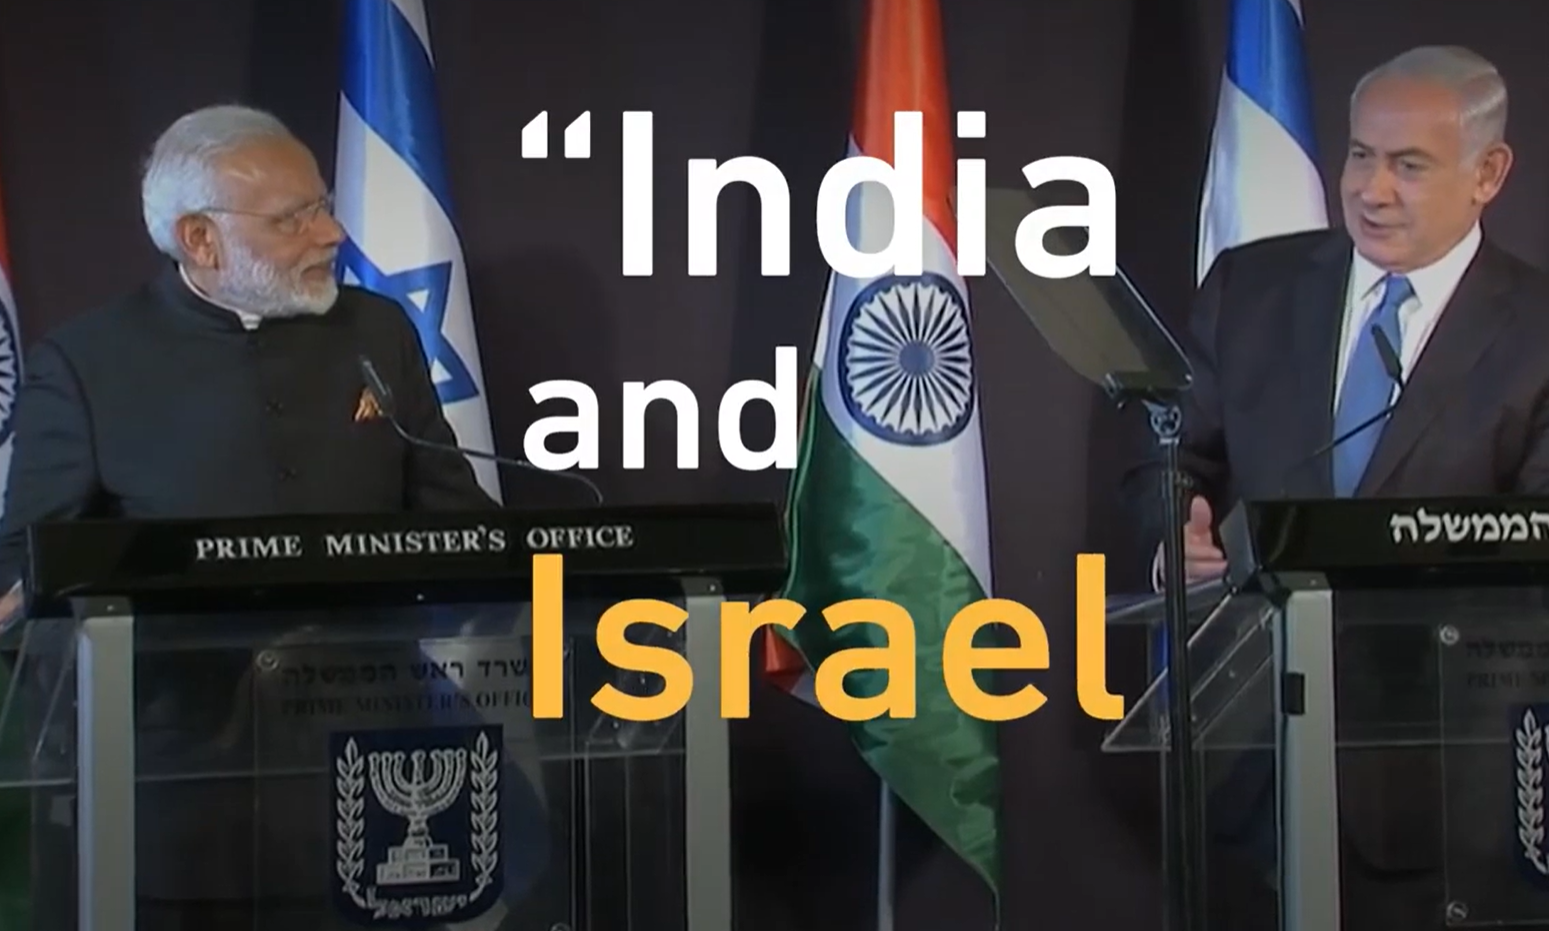 The Great "Leap of Faith" by Israel & India in redressing Palestine & Kashmir problem